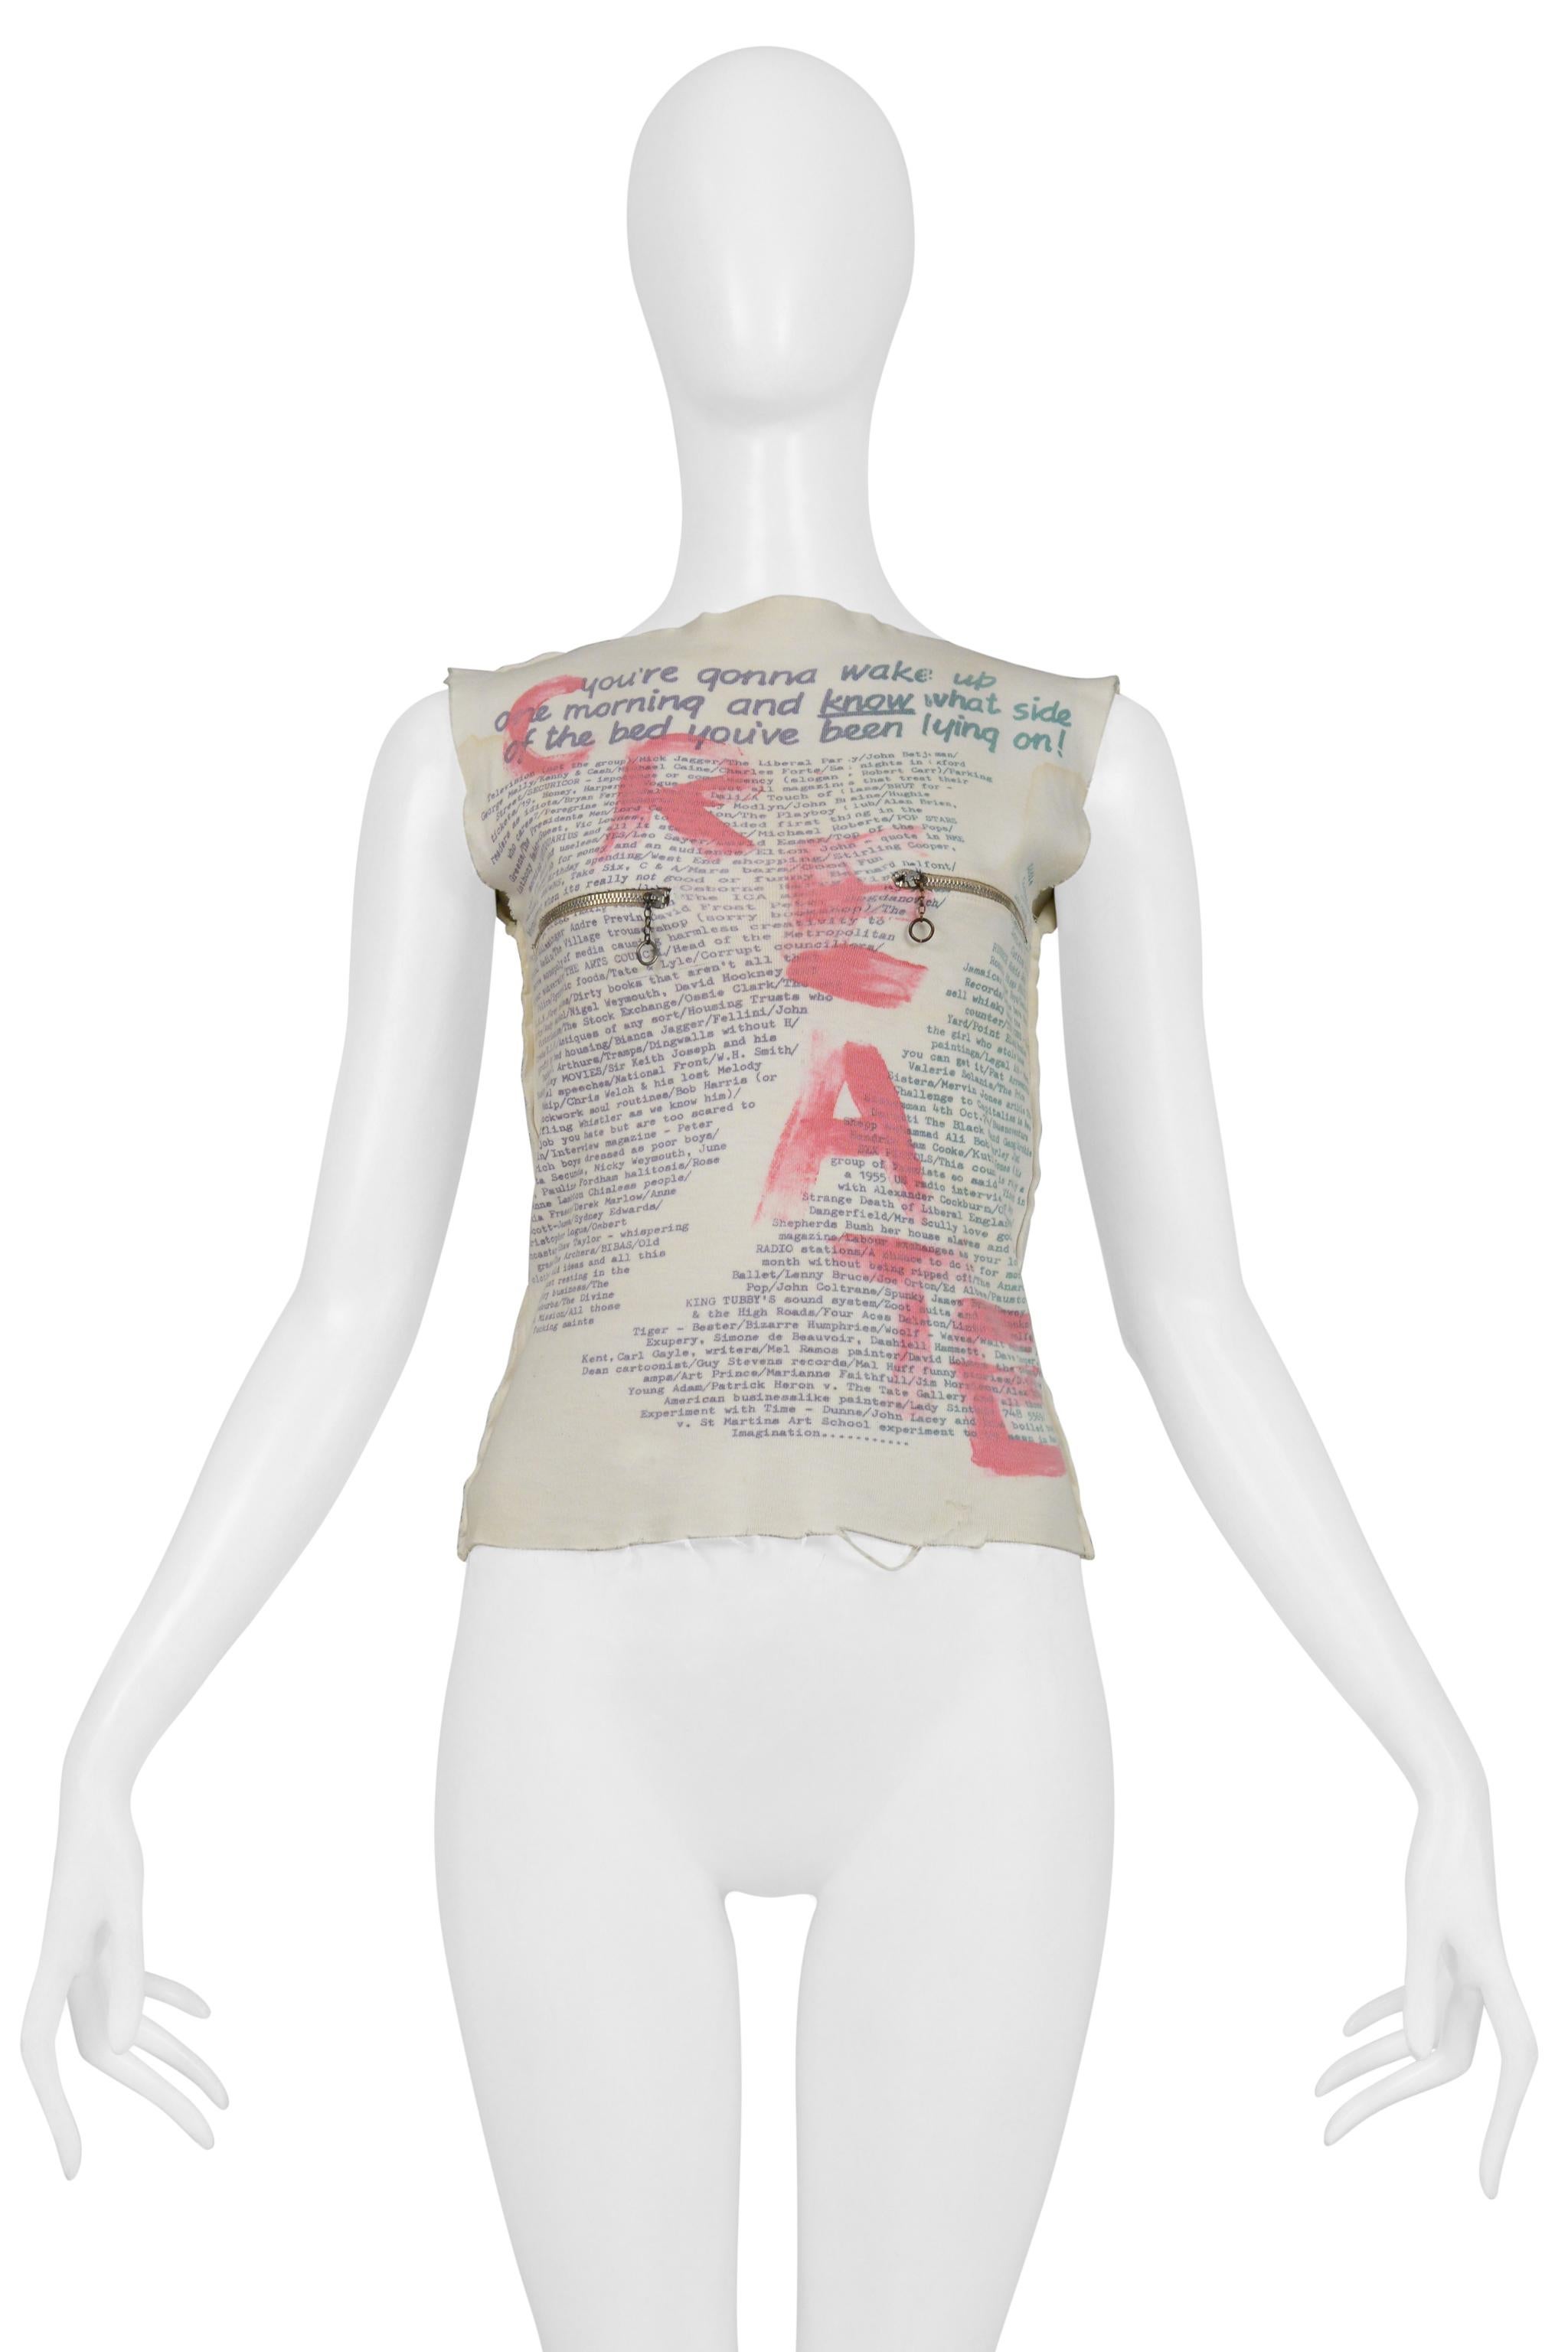 Resurrection Vintage is excited to offer an original and unusual example of a Vivienne Westwood & Malcolm McLaren SEX collection off-white cut-and-sew 